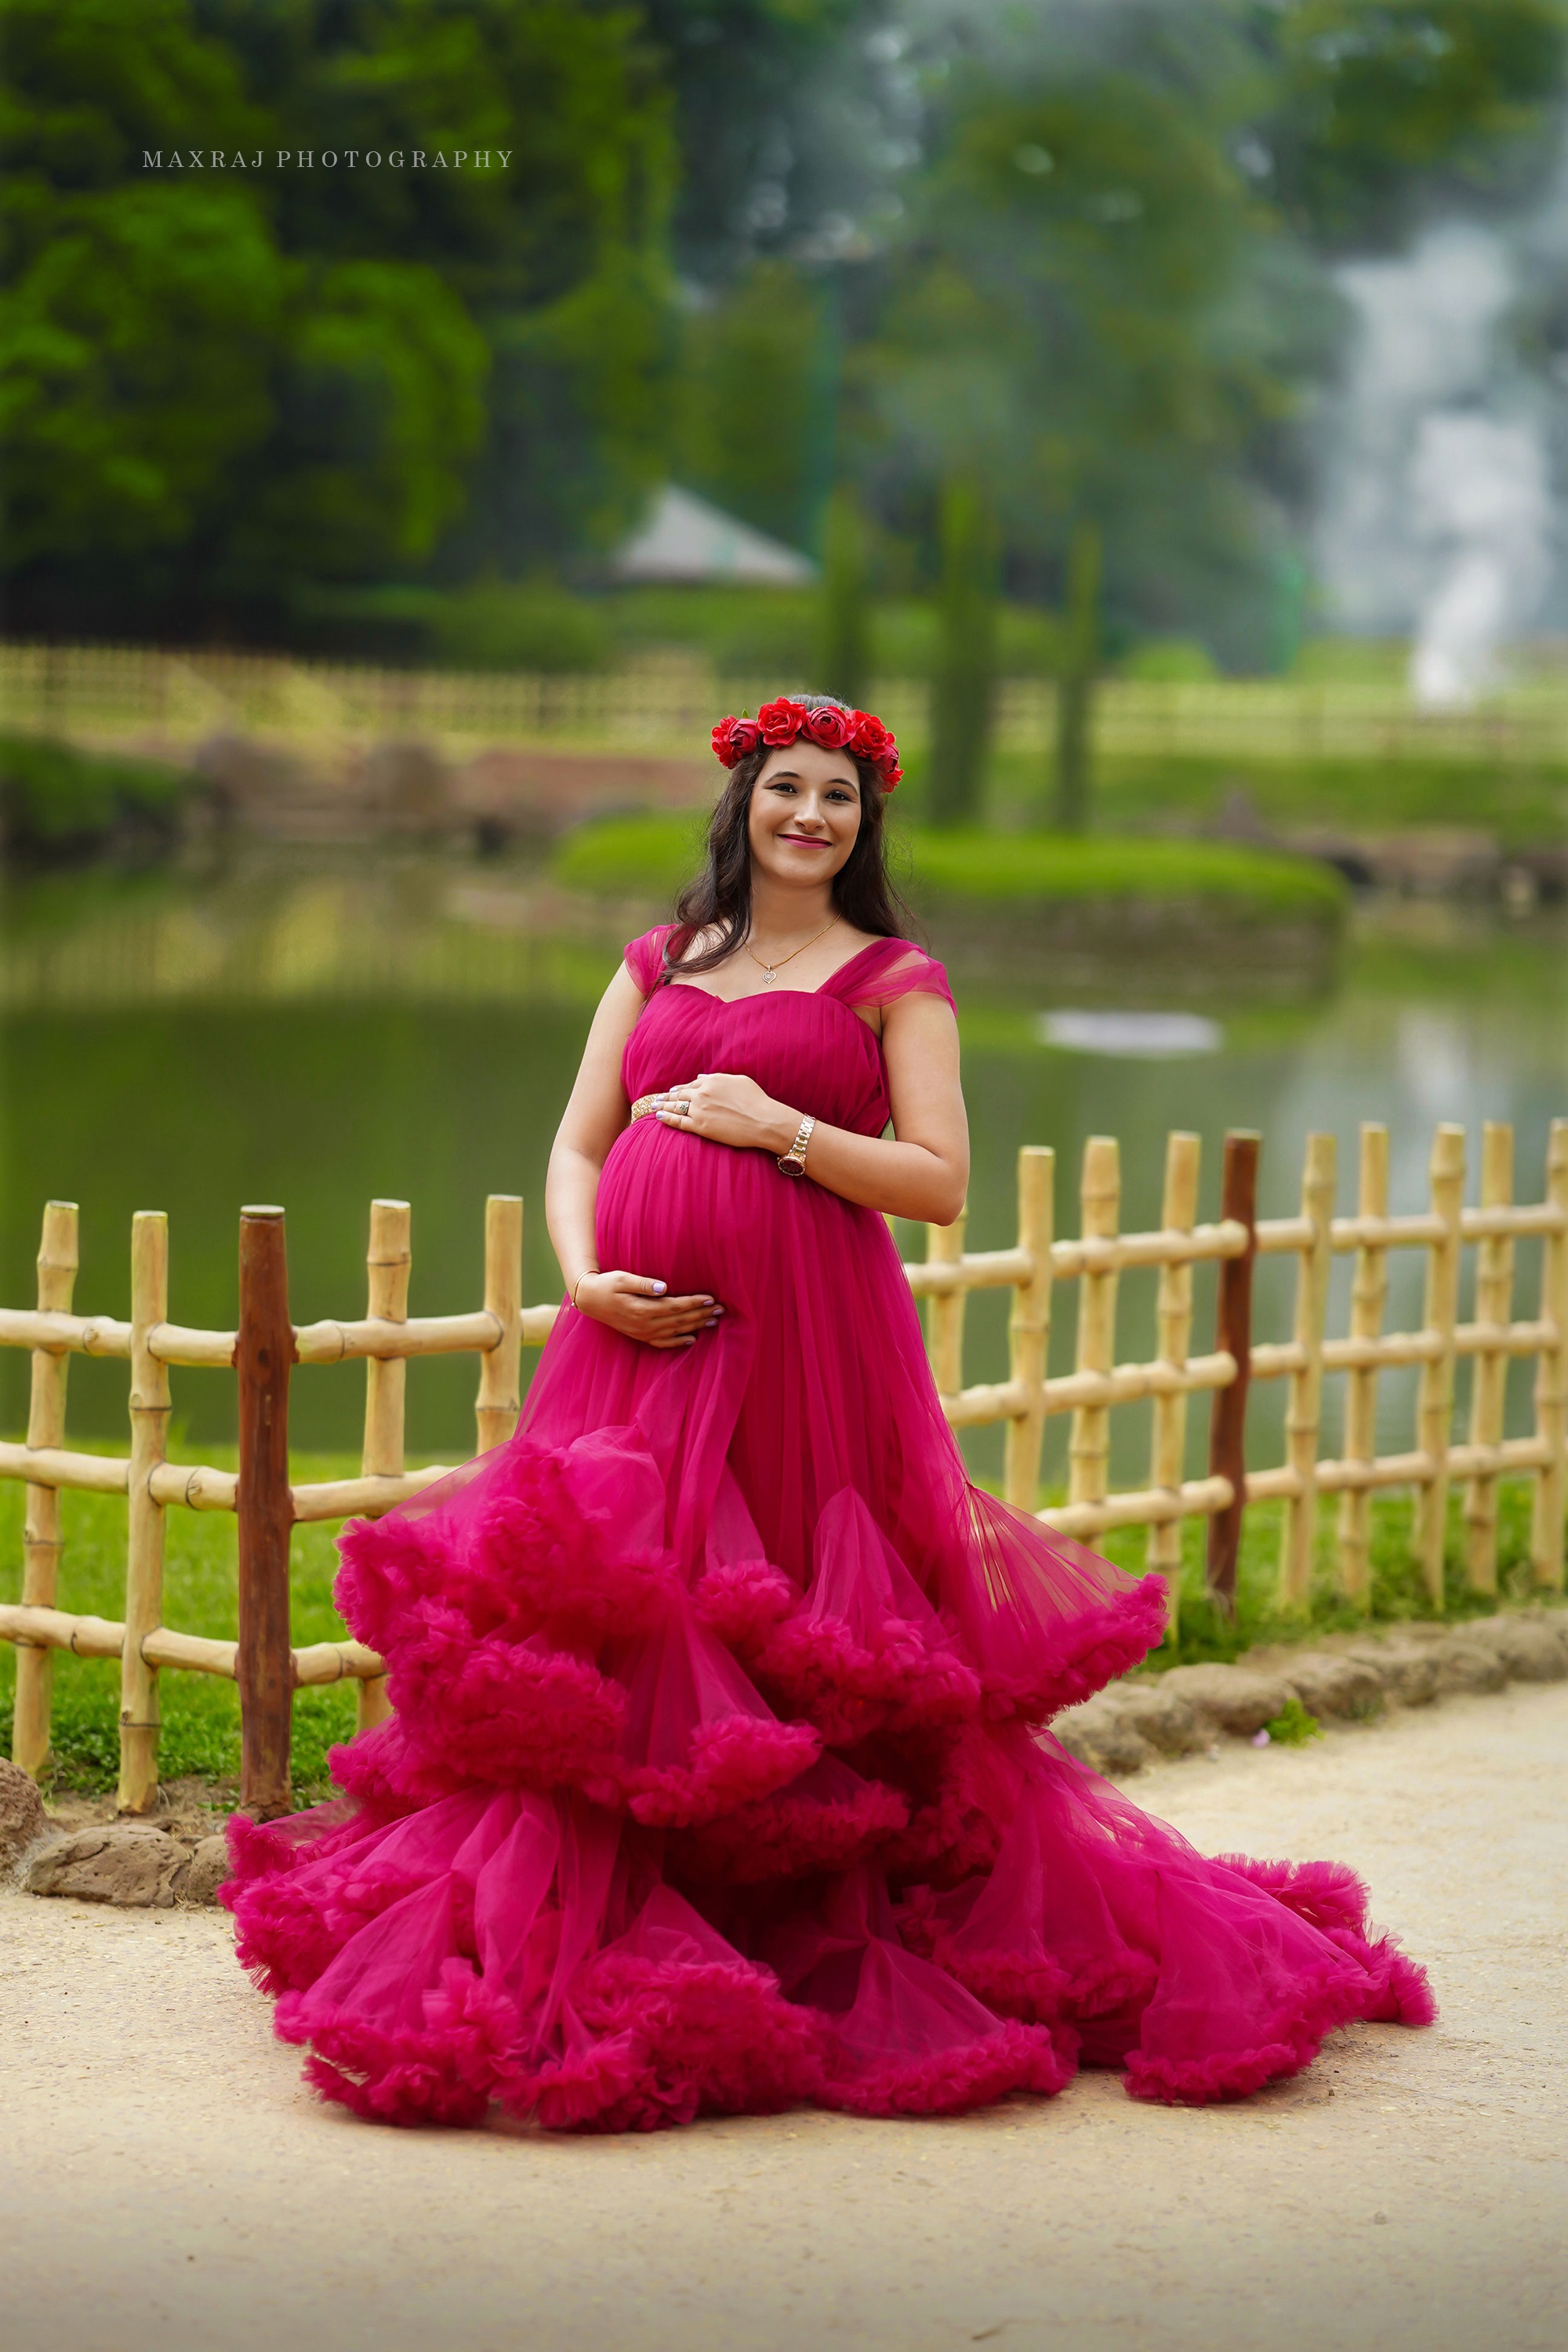 maternity photographer in pune, best maternity photographer in india, maternity photoshoot in pune in pink gown in garden